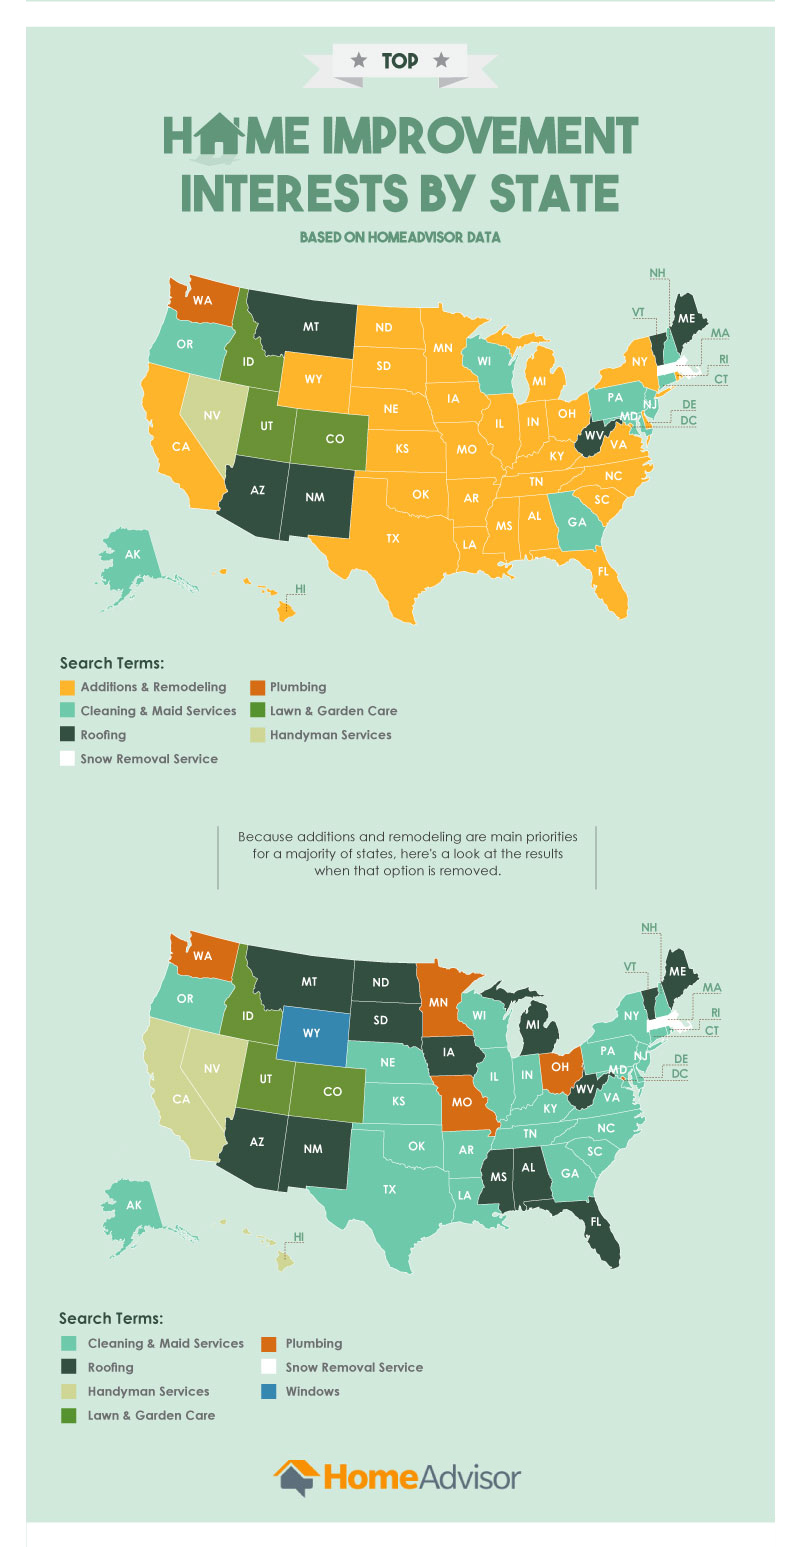 Top Home Improvement Interests by State